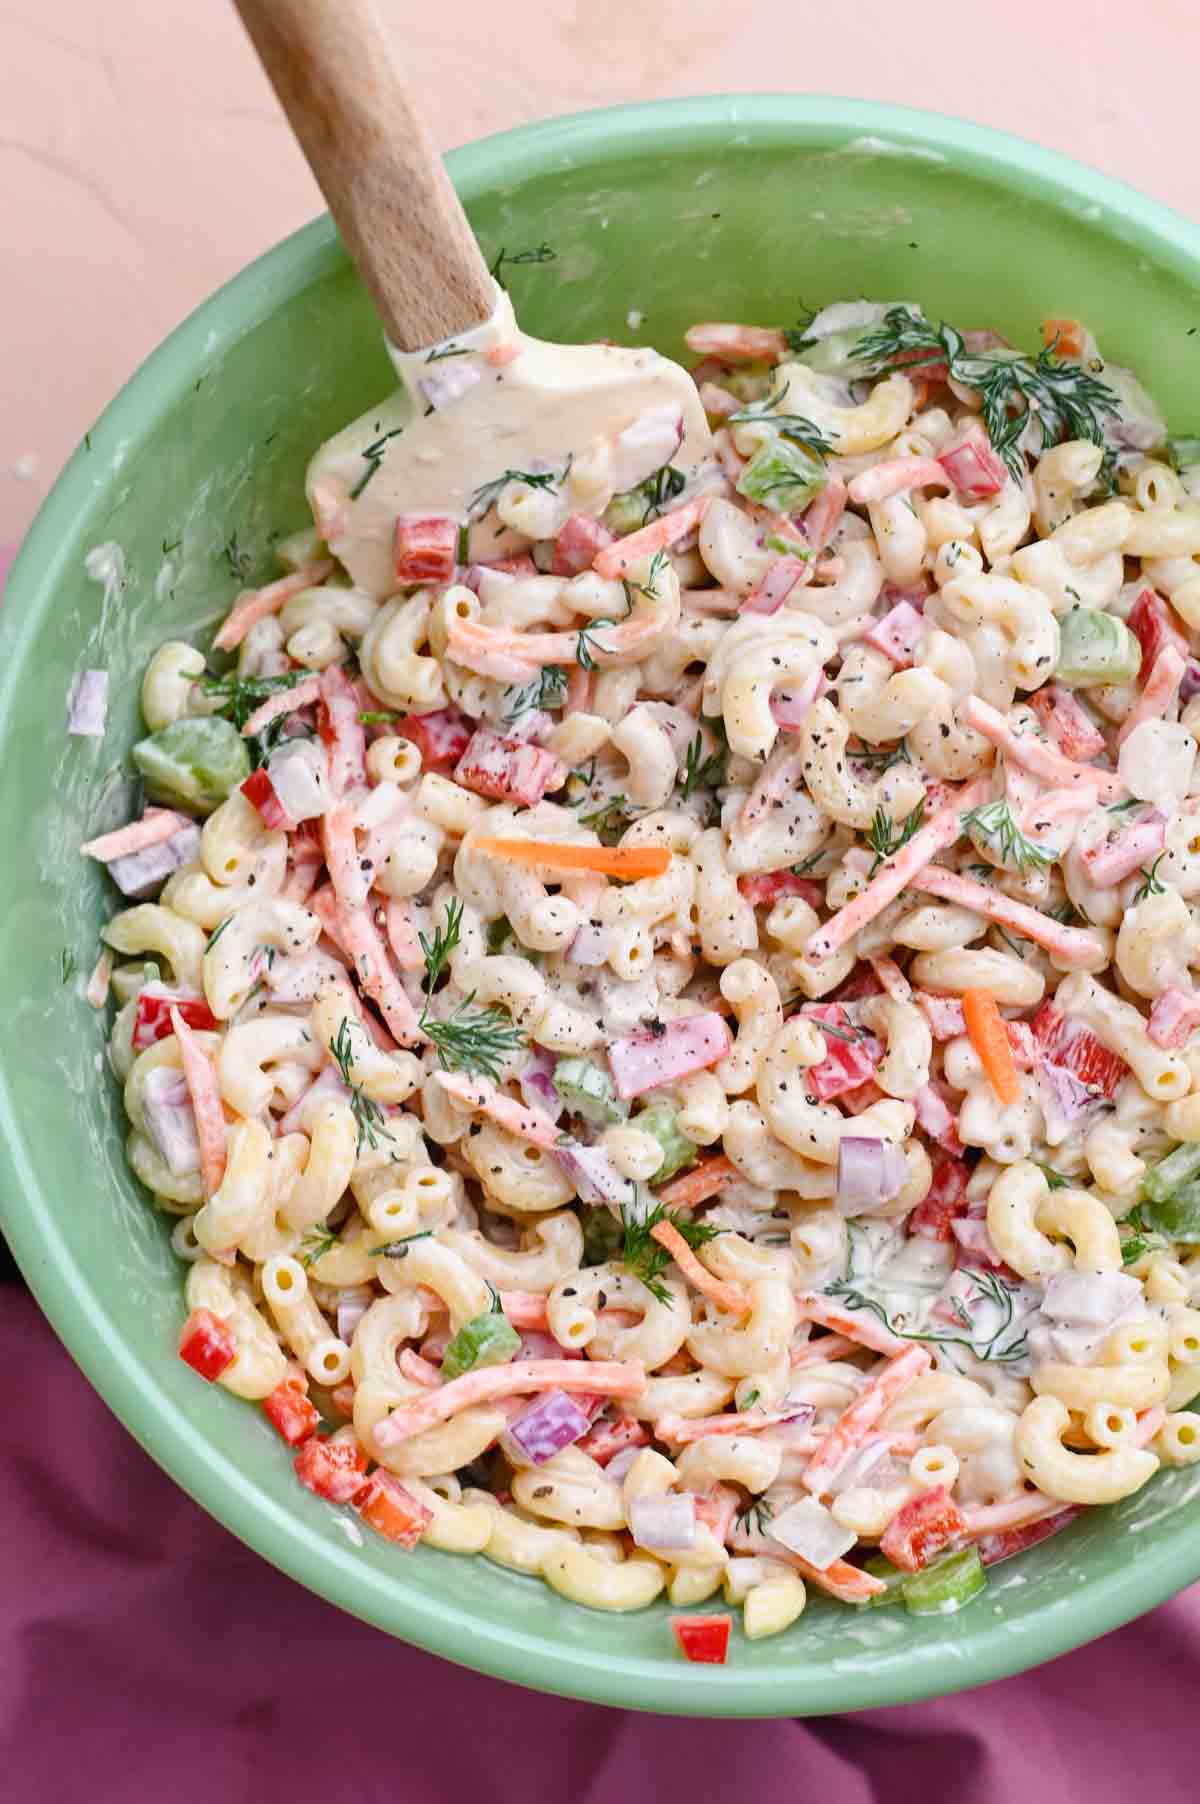 Green bowl filled with macaroni salad and a wood-handled spatula.